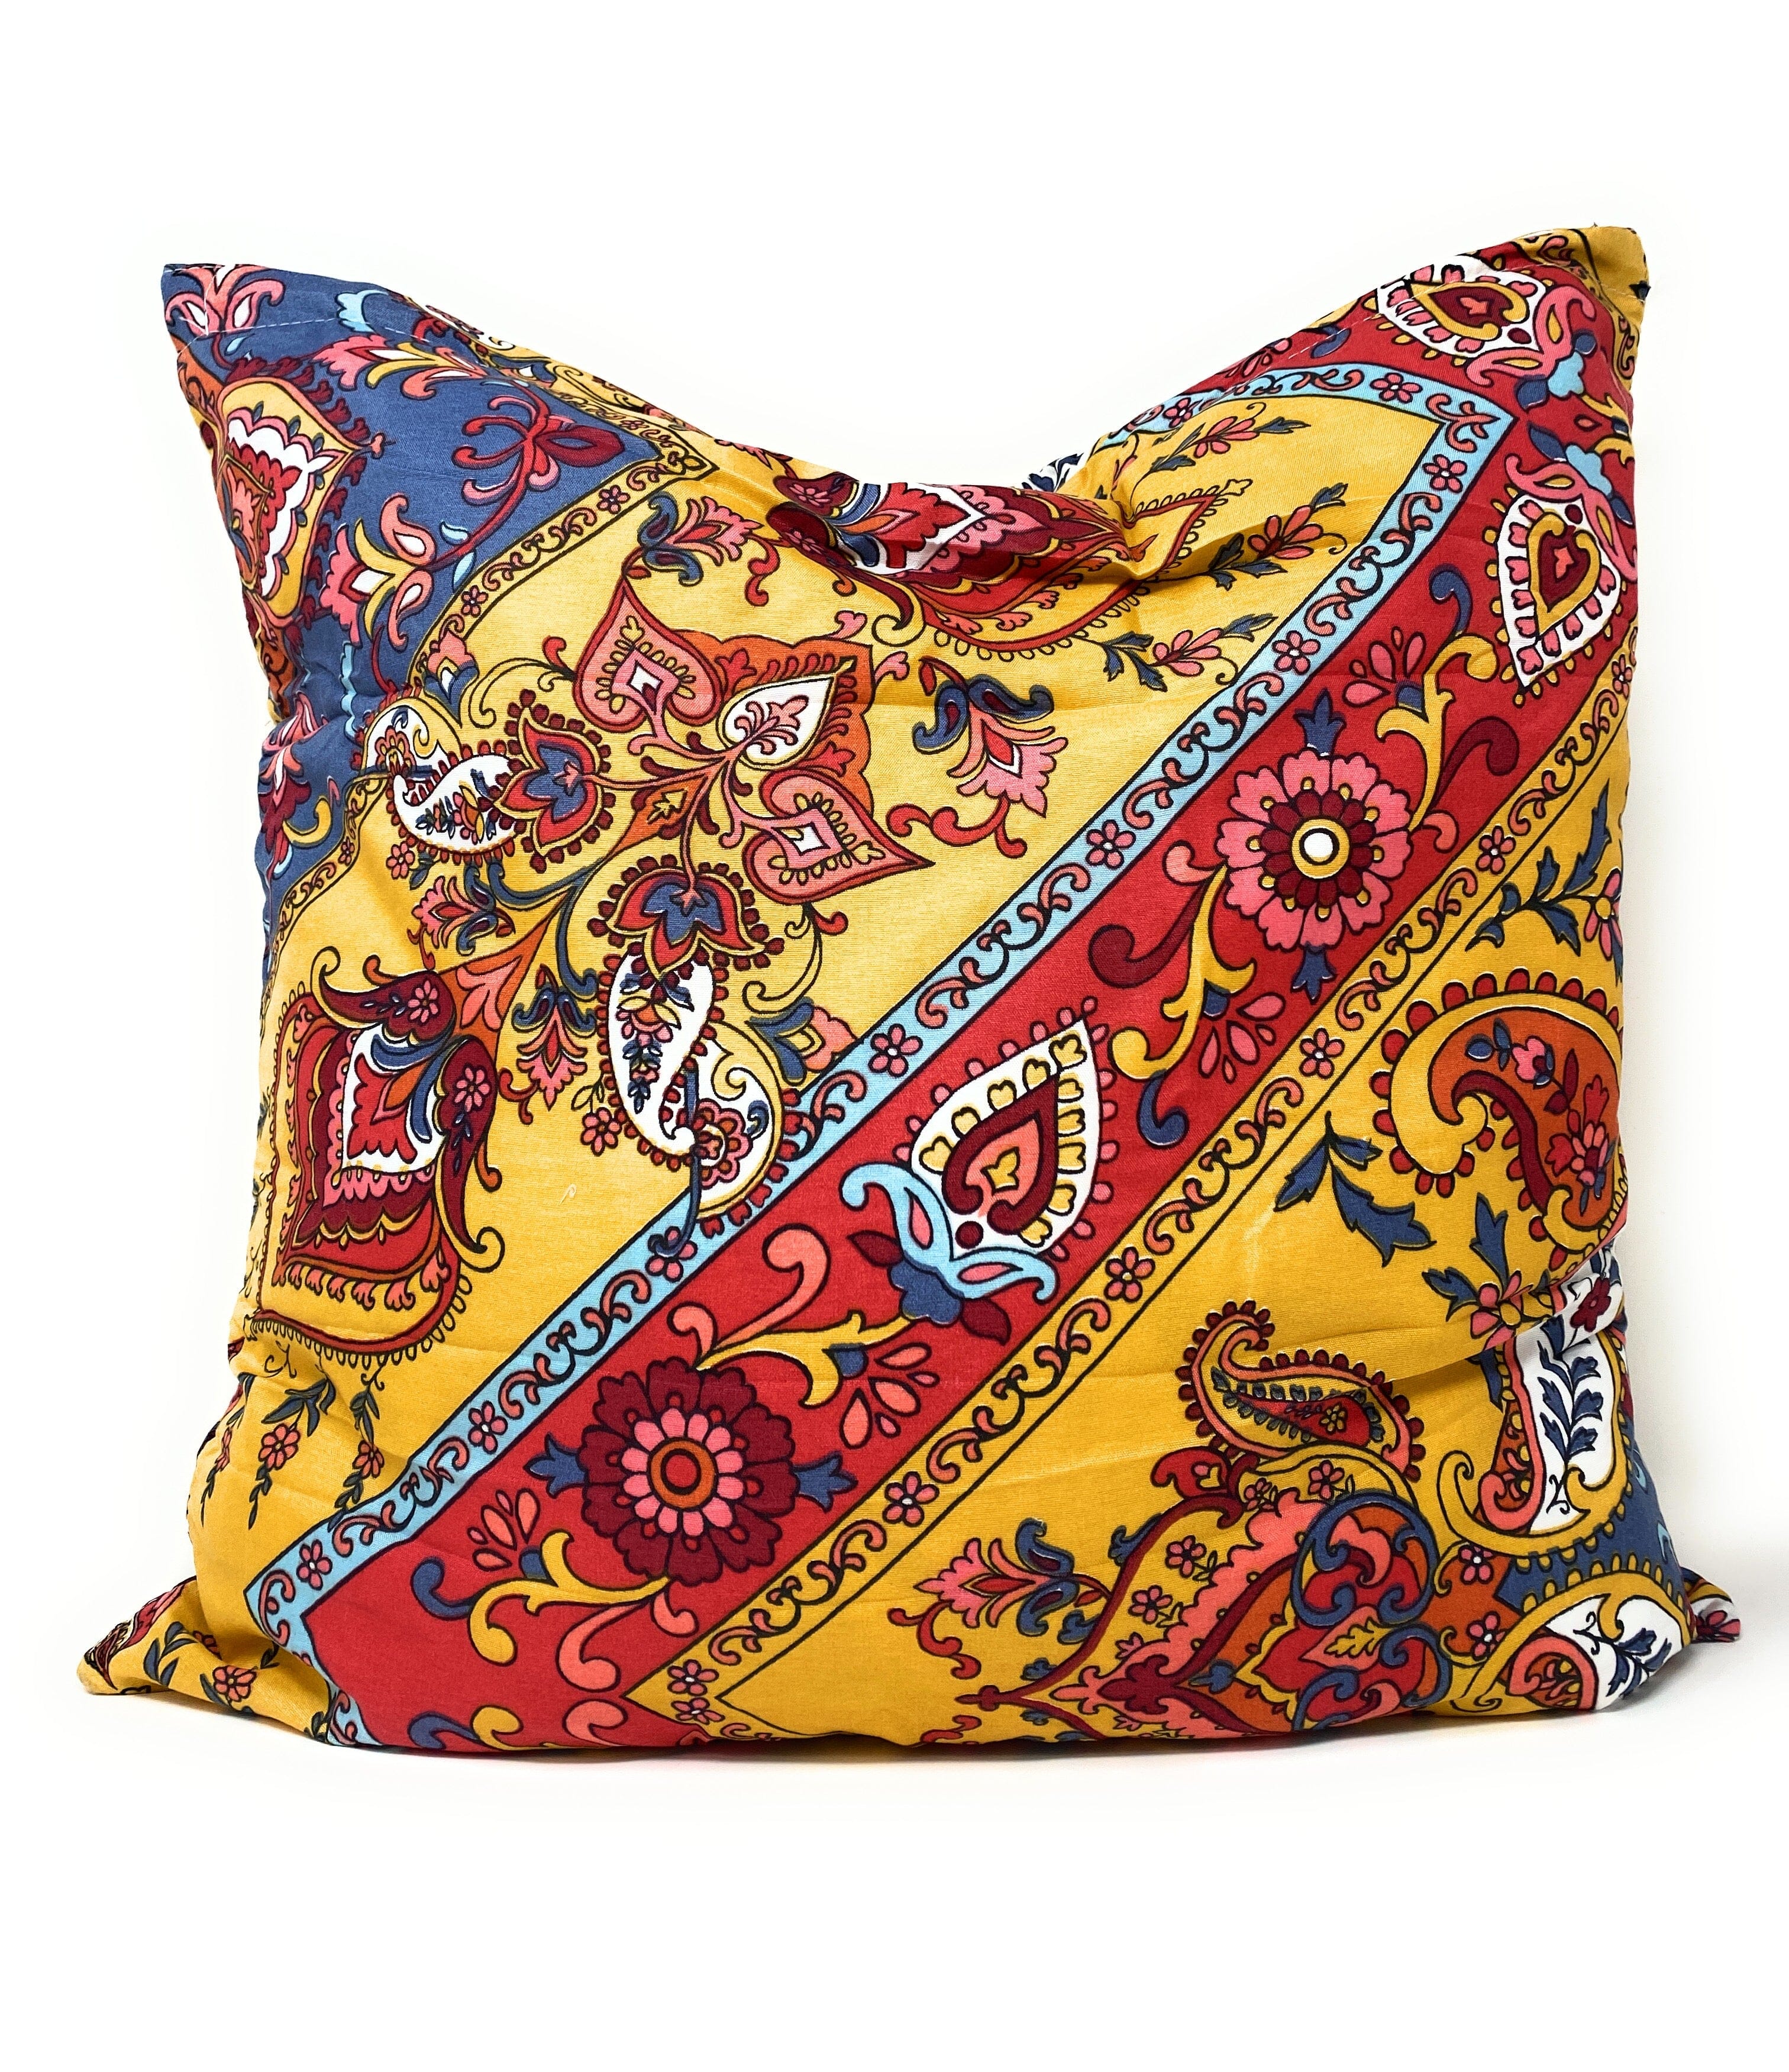 Tache Mustard Yellow Blue Red Paisley Chevron Hanging Gardens Cushion Cover 2-Pieces (HS3148Y) - Tache Home Fashion